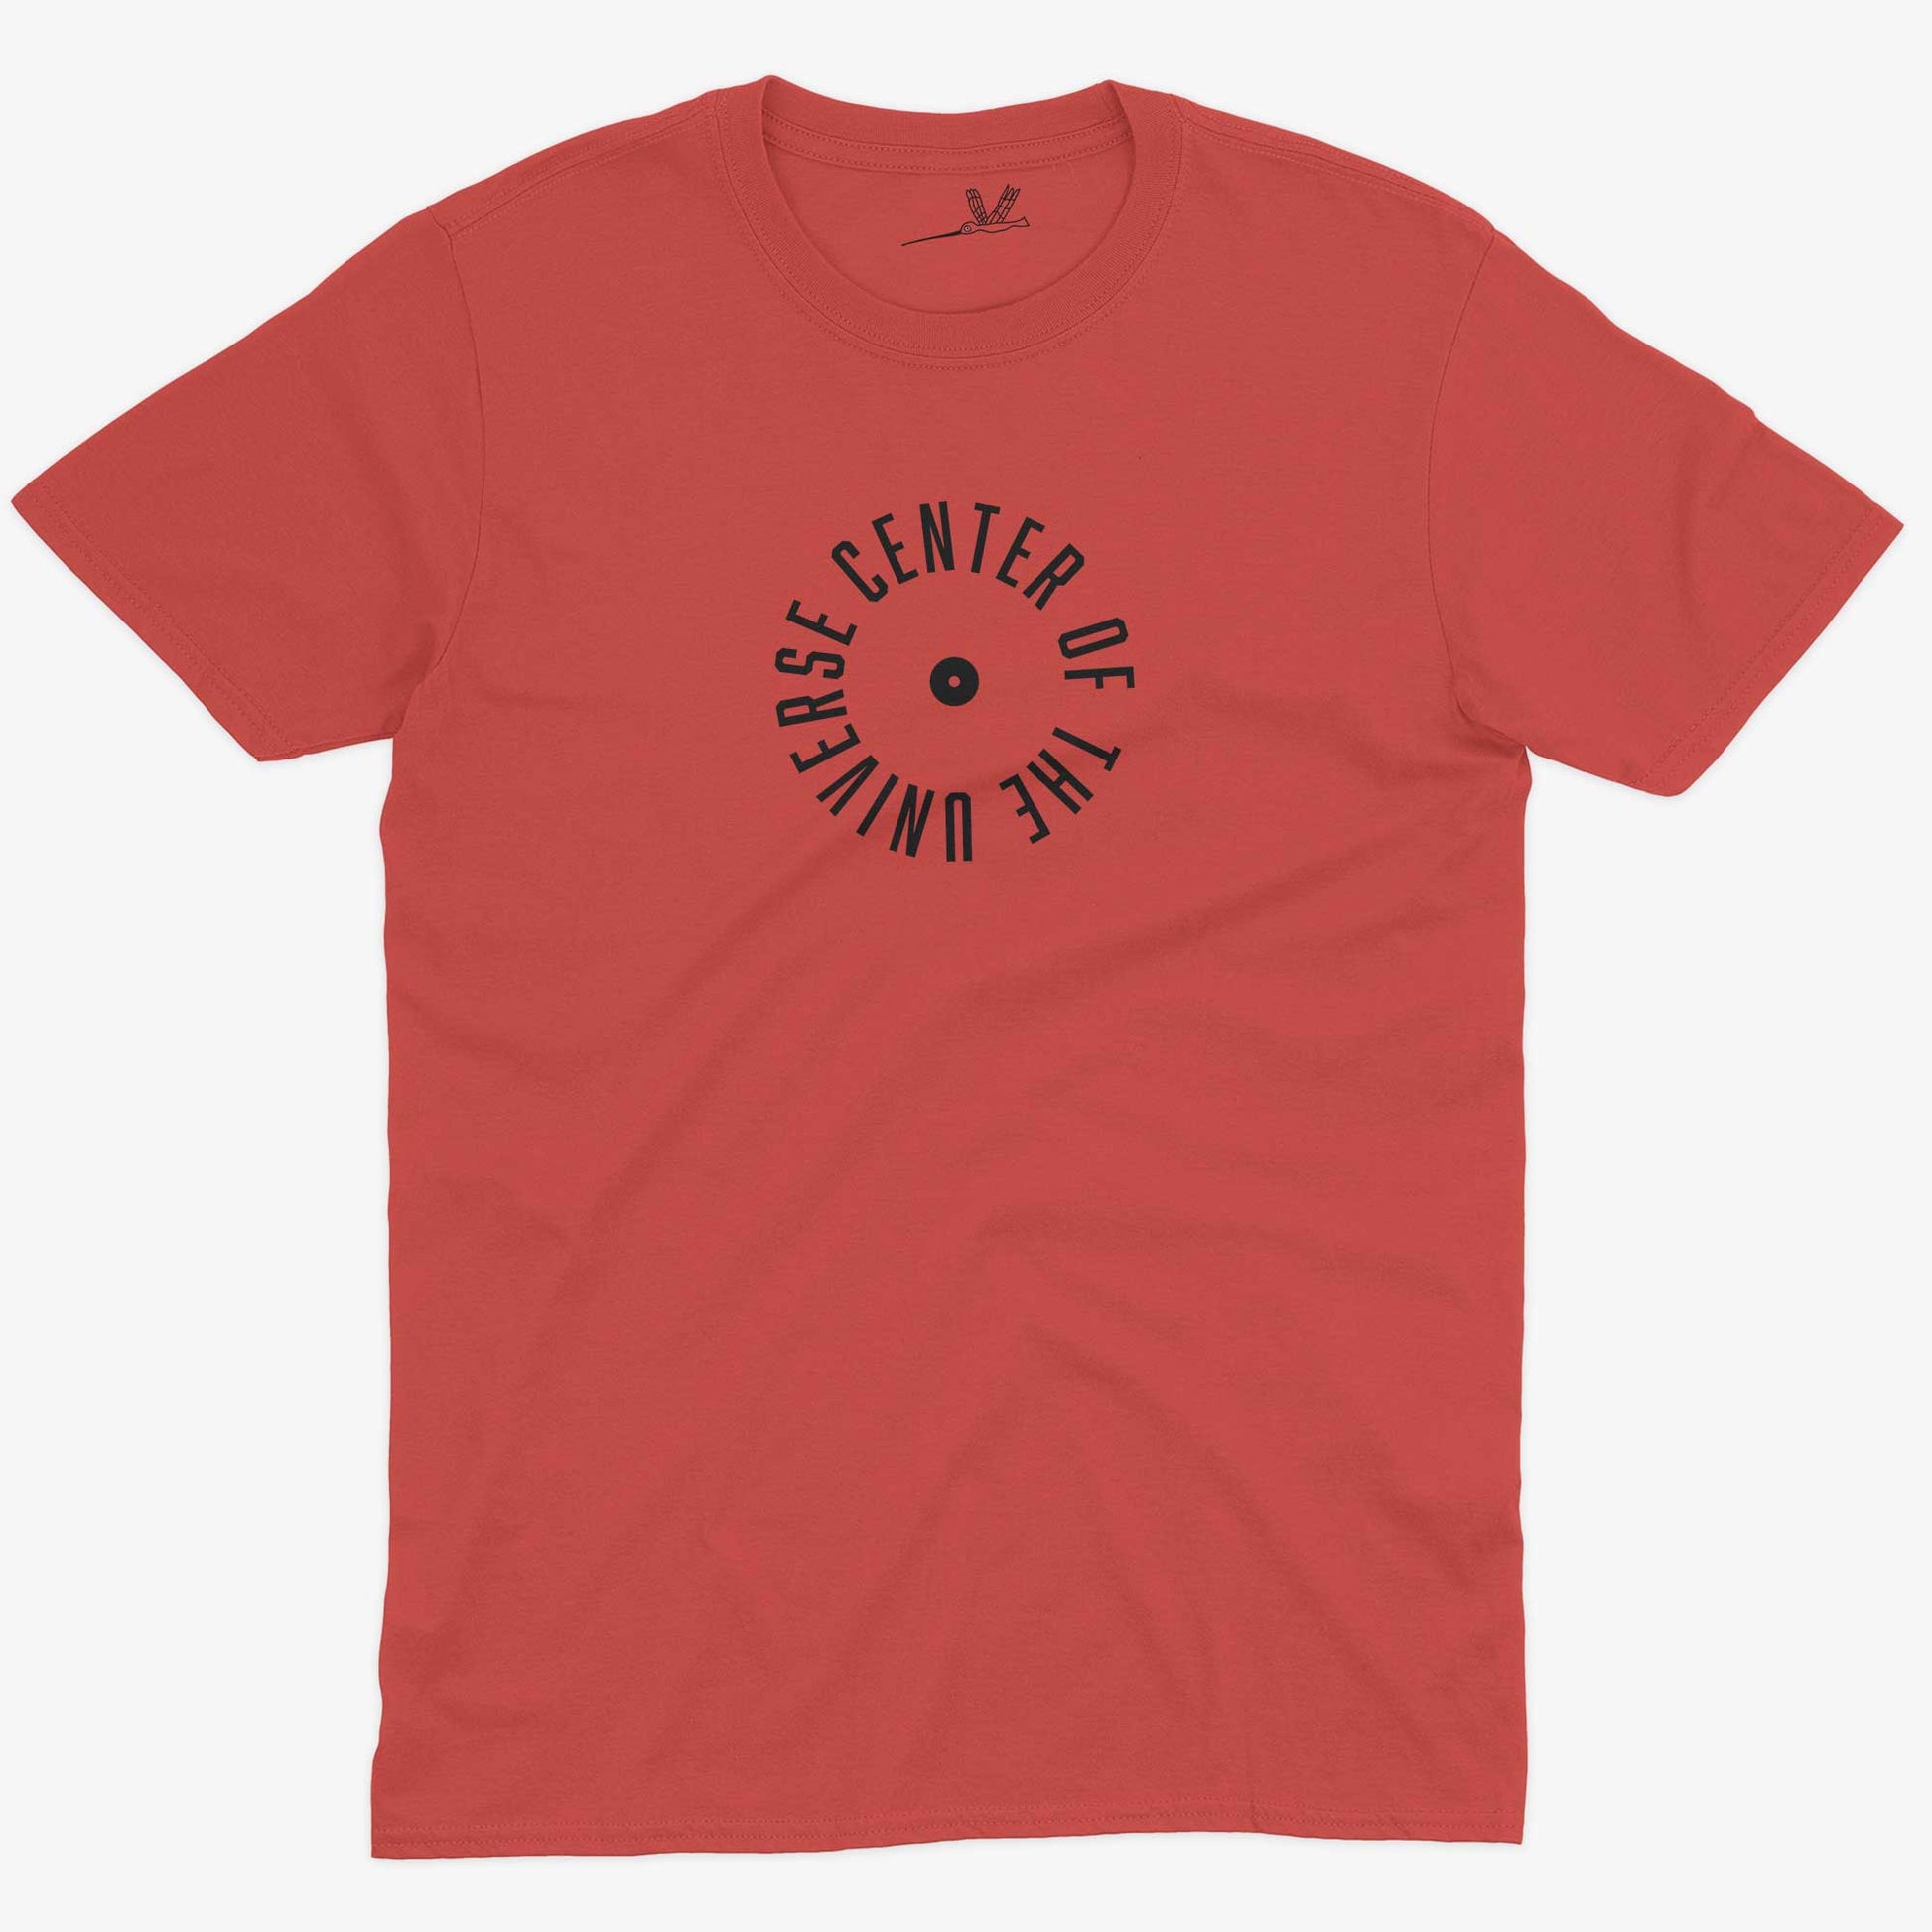 Center Of The Universe Unisex Or Women's Cotton T-shirt-Red-Unisex